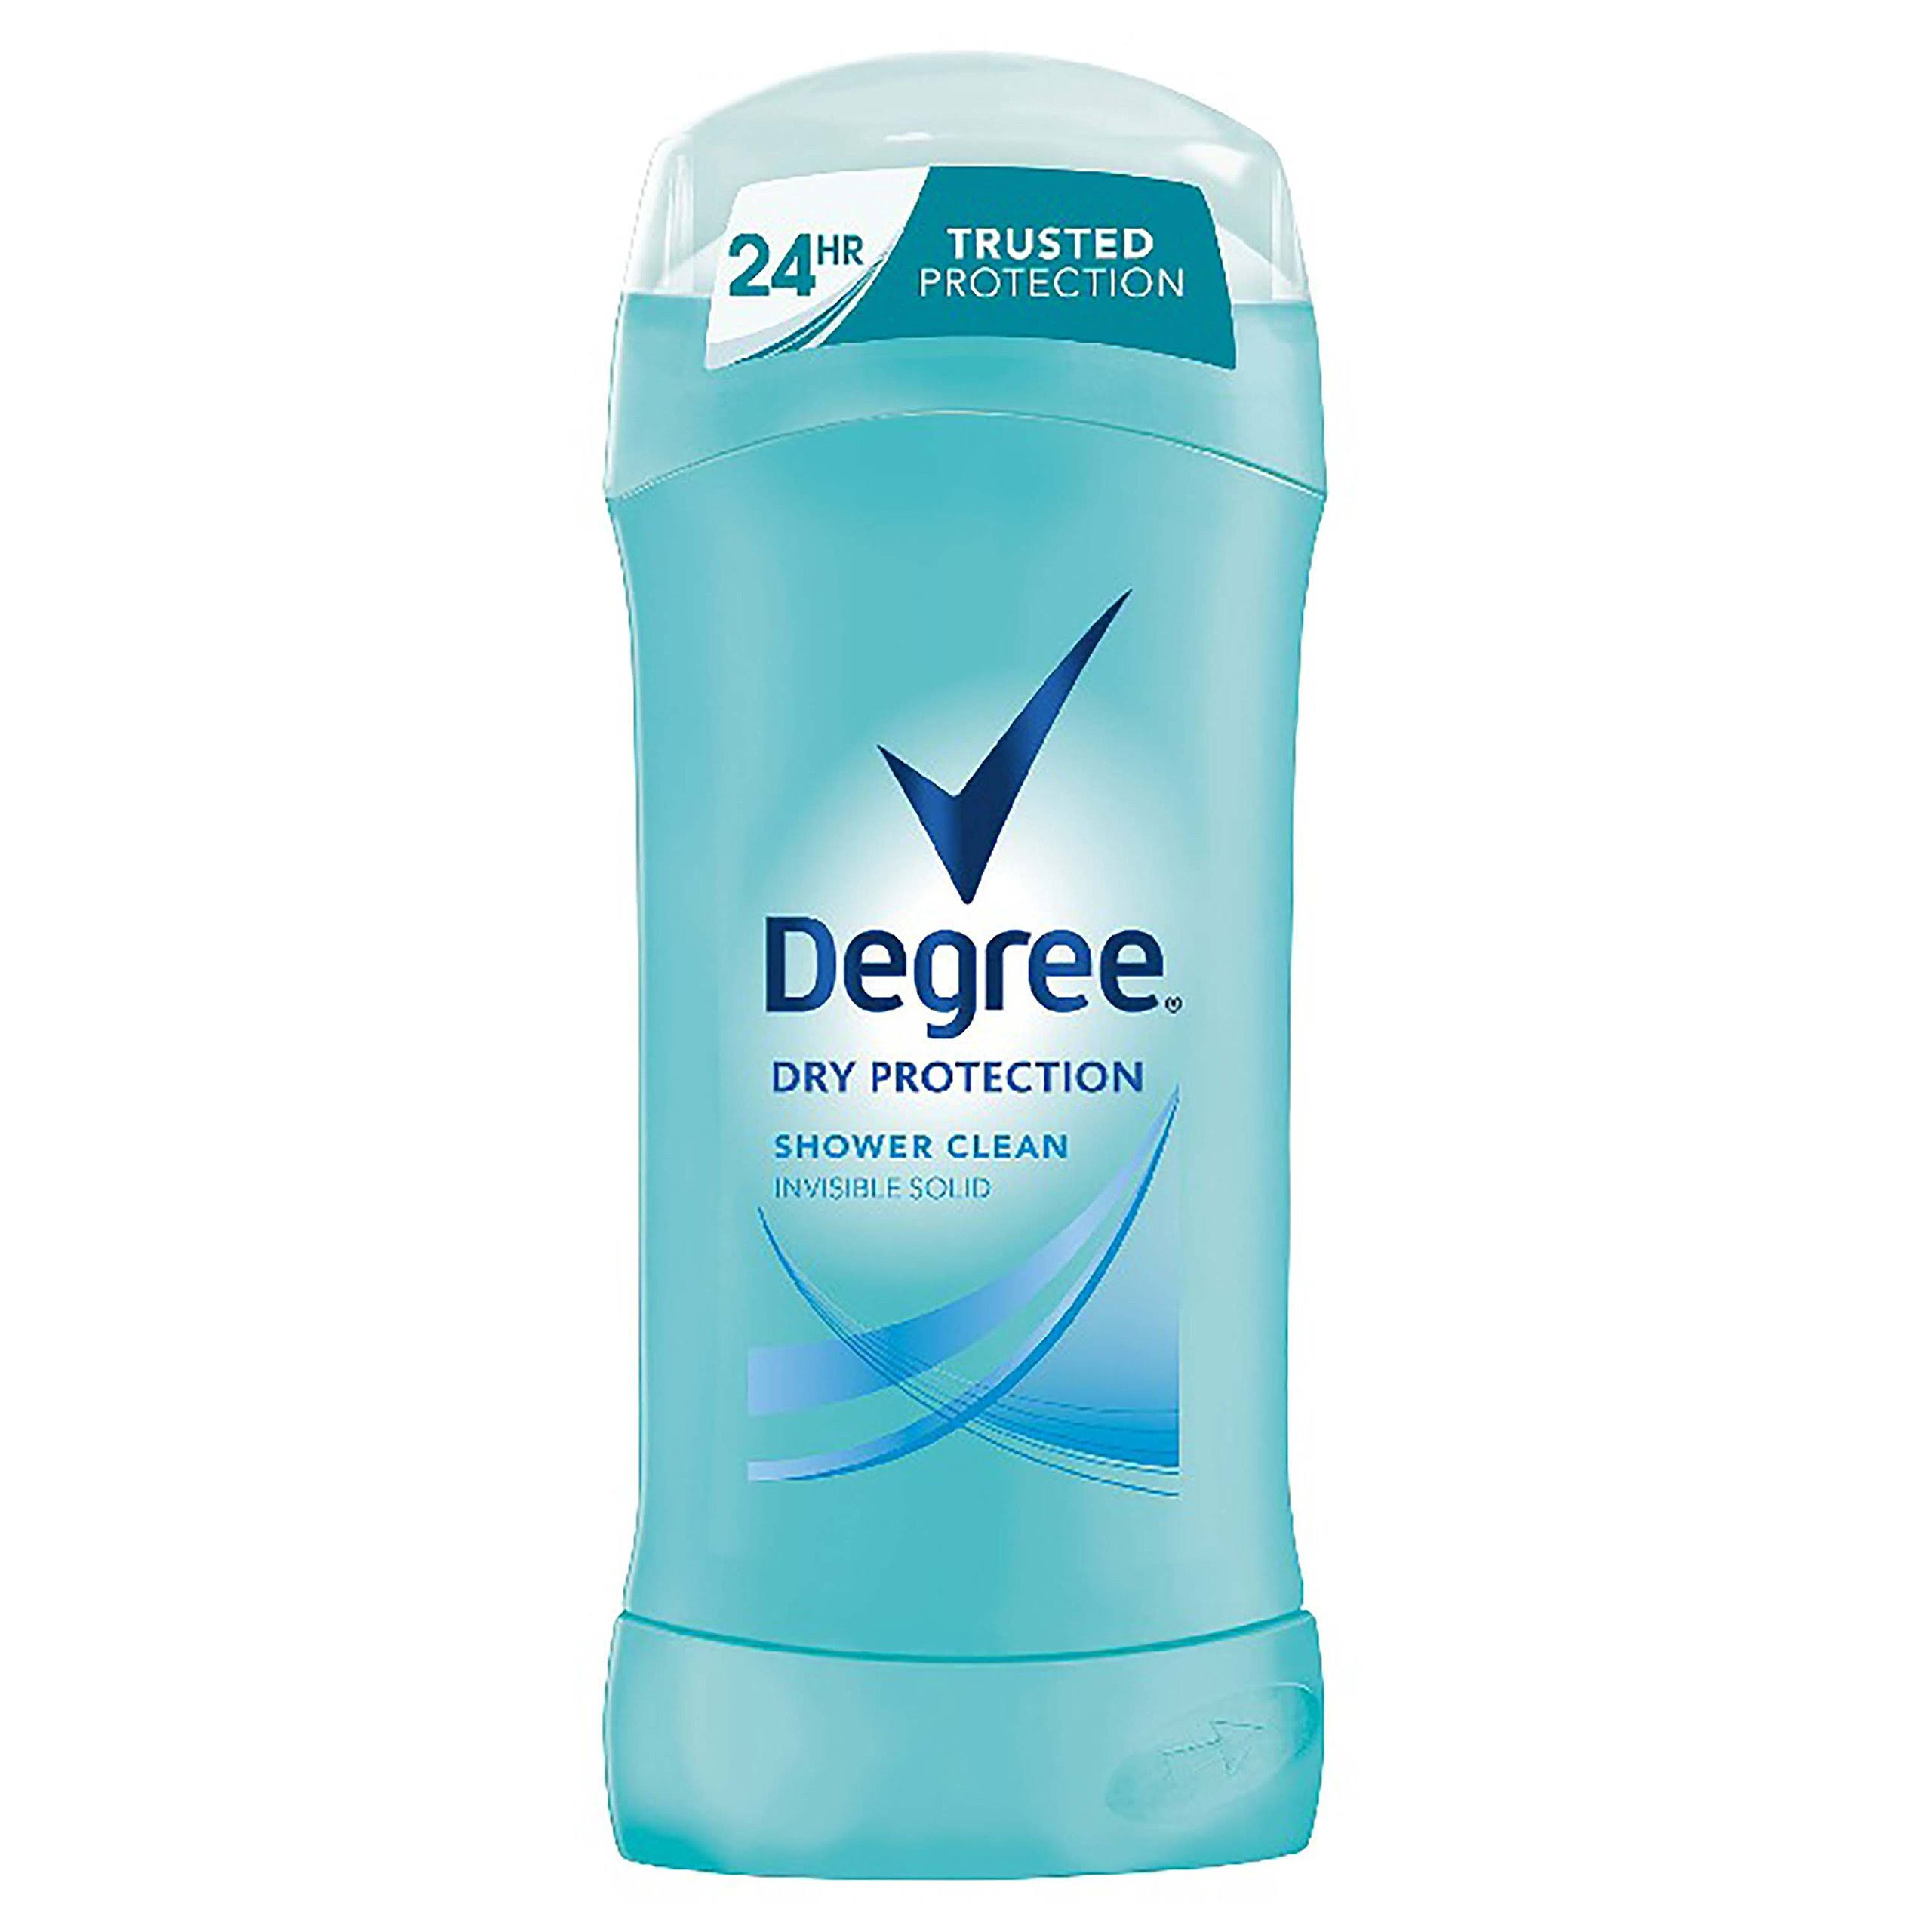 Degree Women Dry Protect Antiperspirant Deodorant - Shower Clean Invisible Solid, 2.6oz